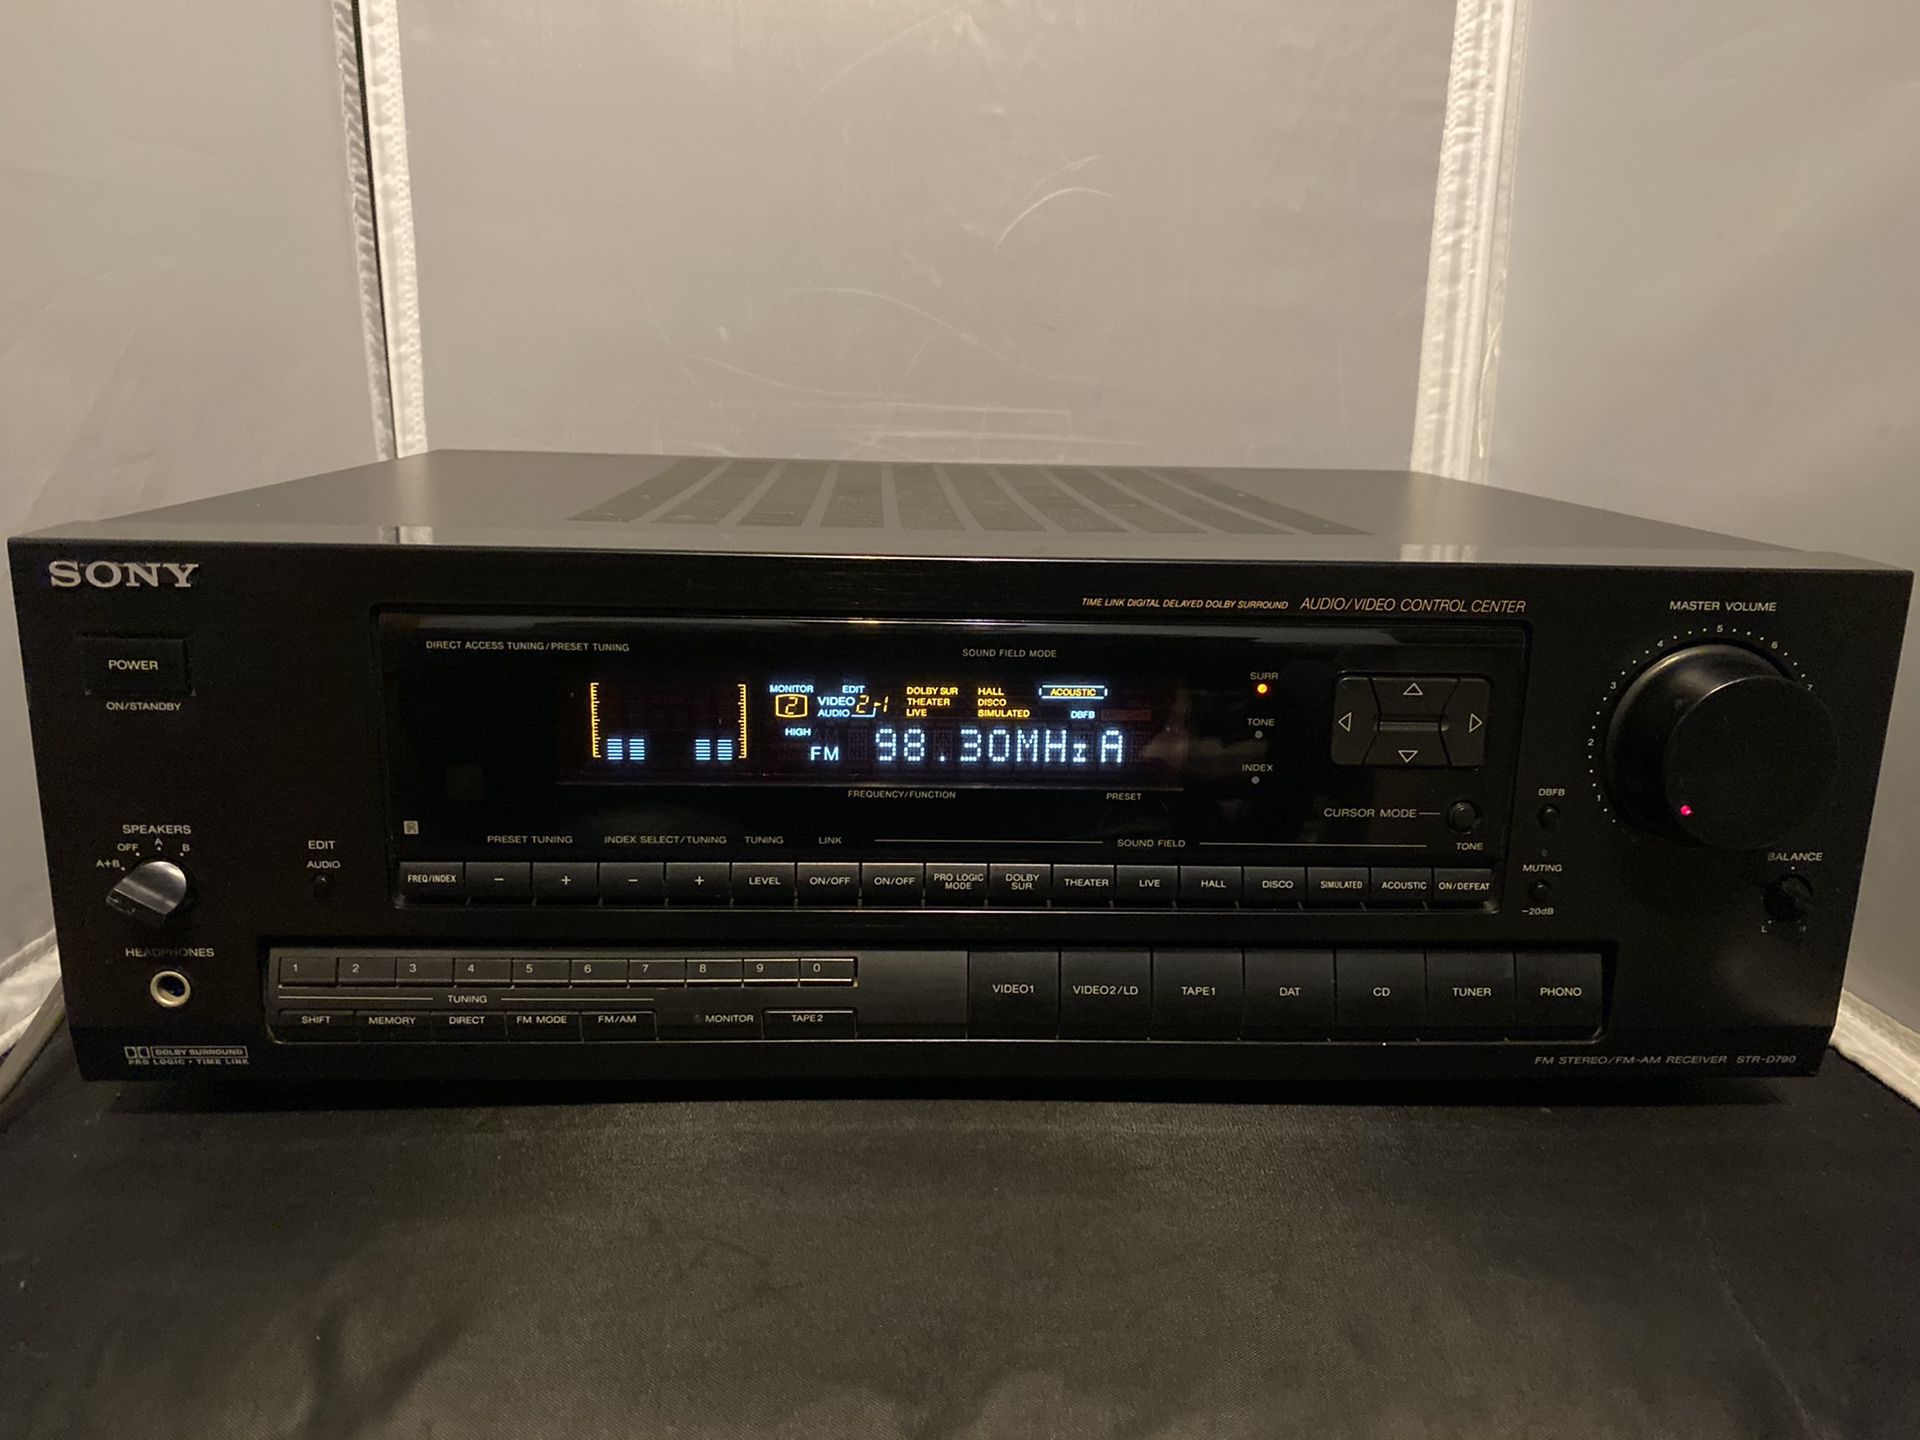 Sony STR D790 5.1 Channel Pro Logic Home Theater Stereo Receiver.